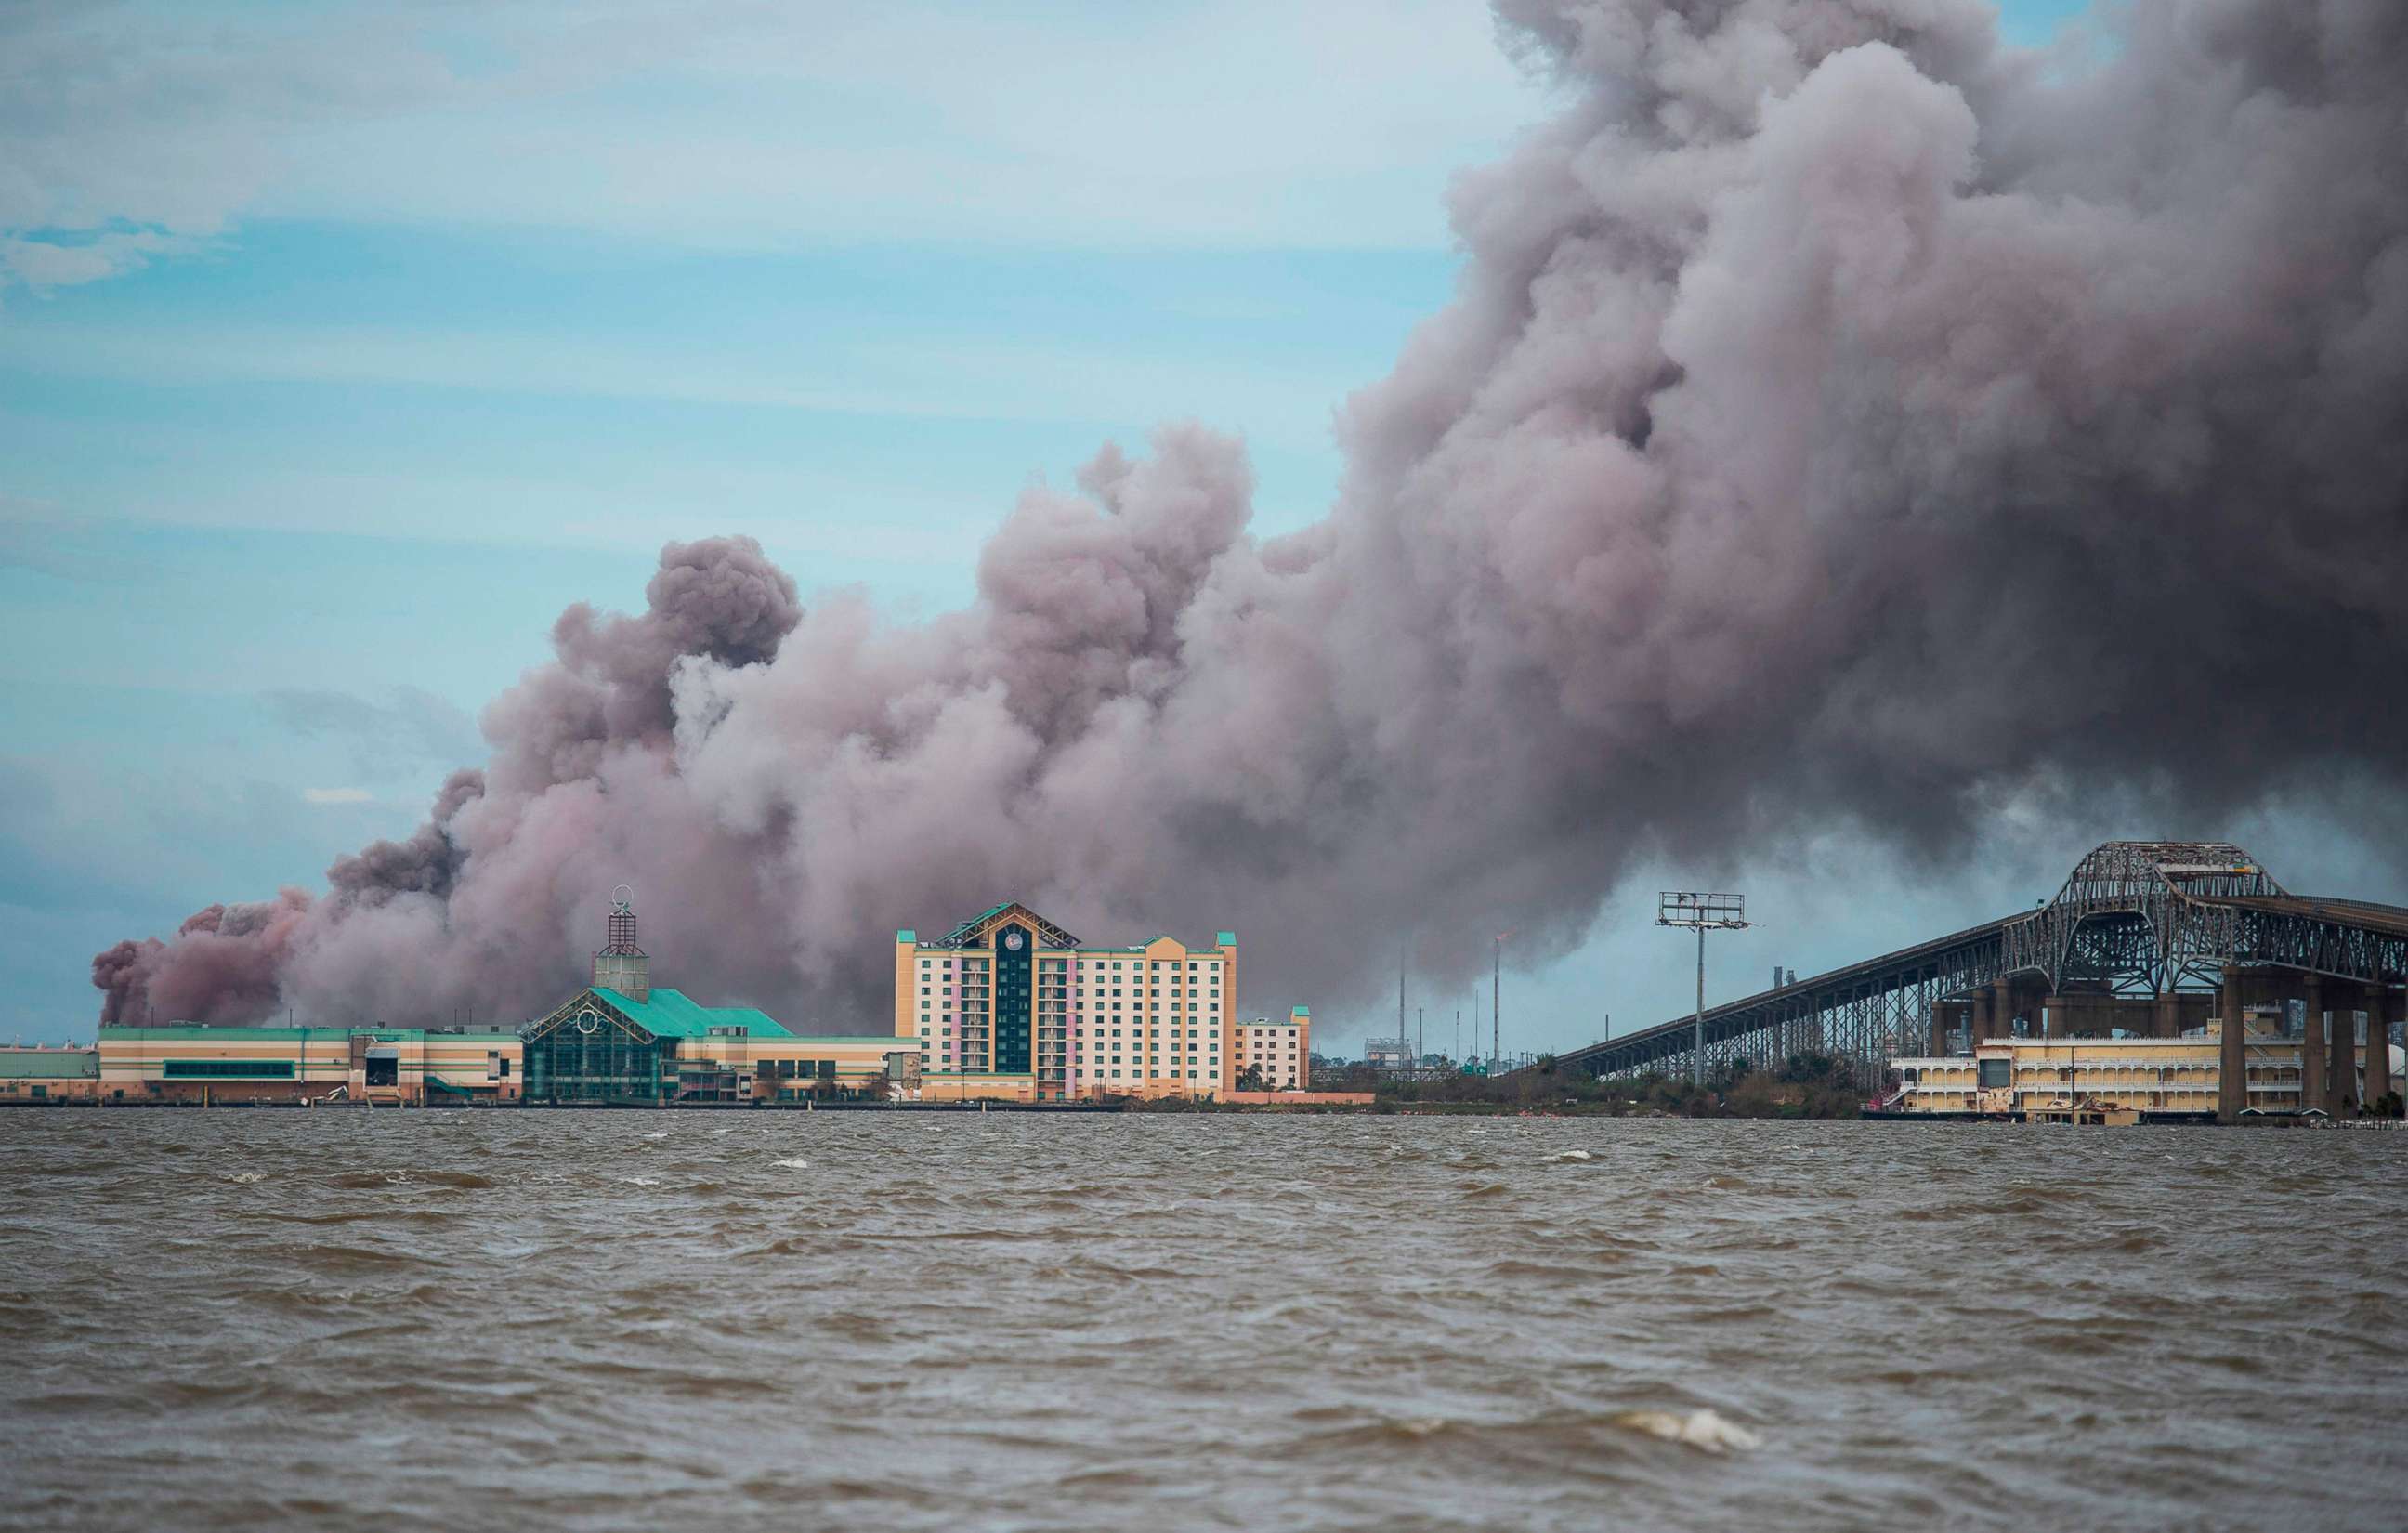 PHOTO: Smoke rises from a burning chemical plant after the passing of Hurricane Laura in Lake Charles, La., Aug. 27, 2020.